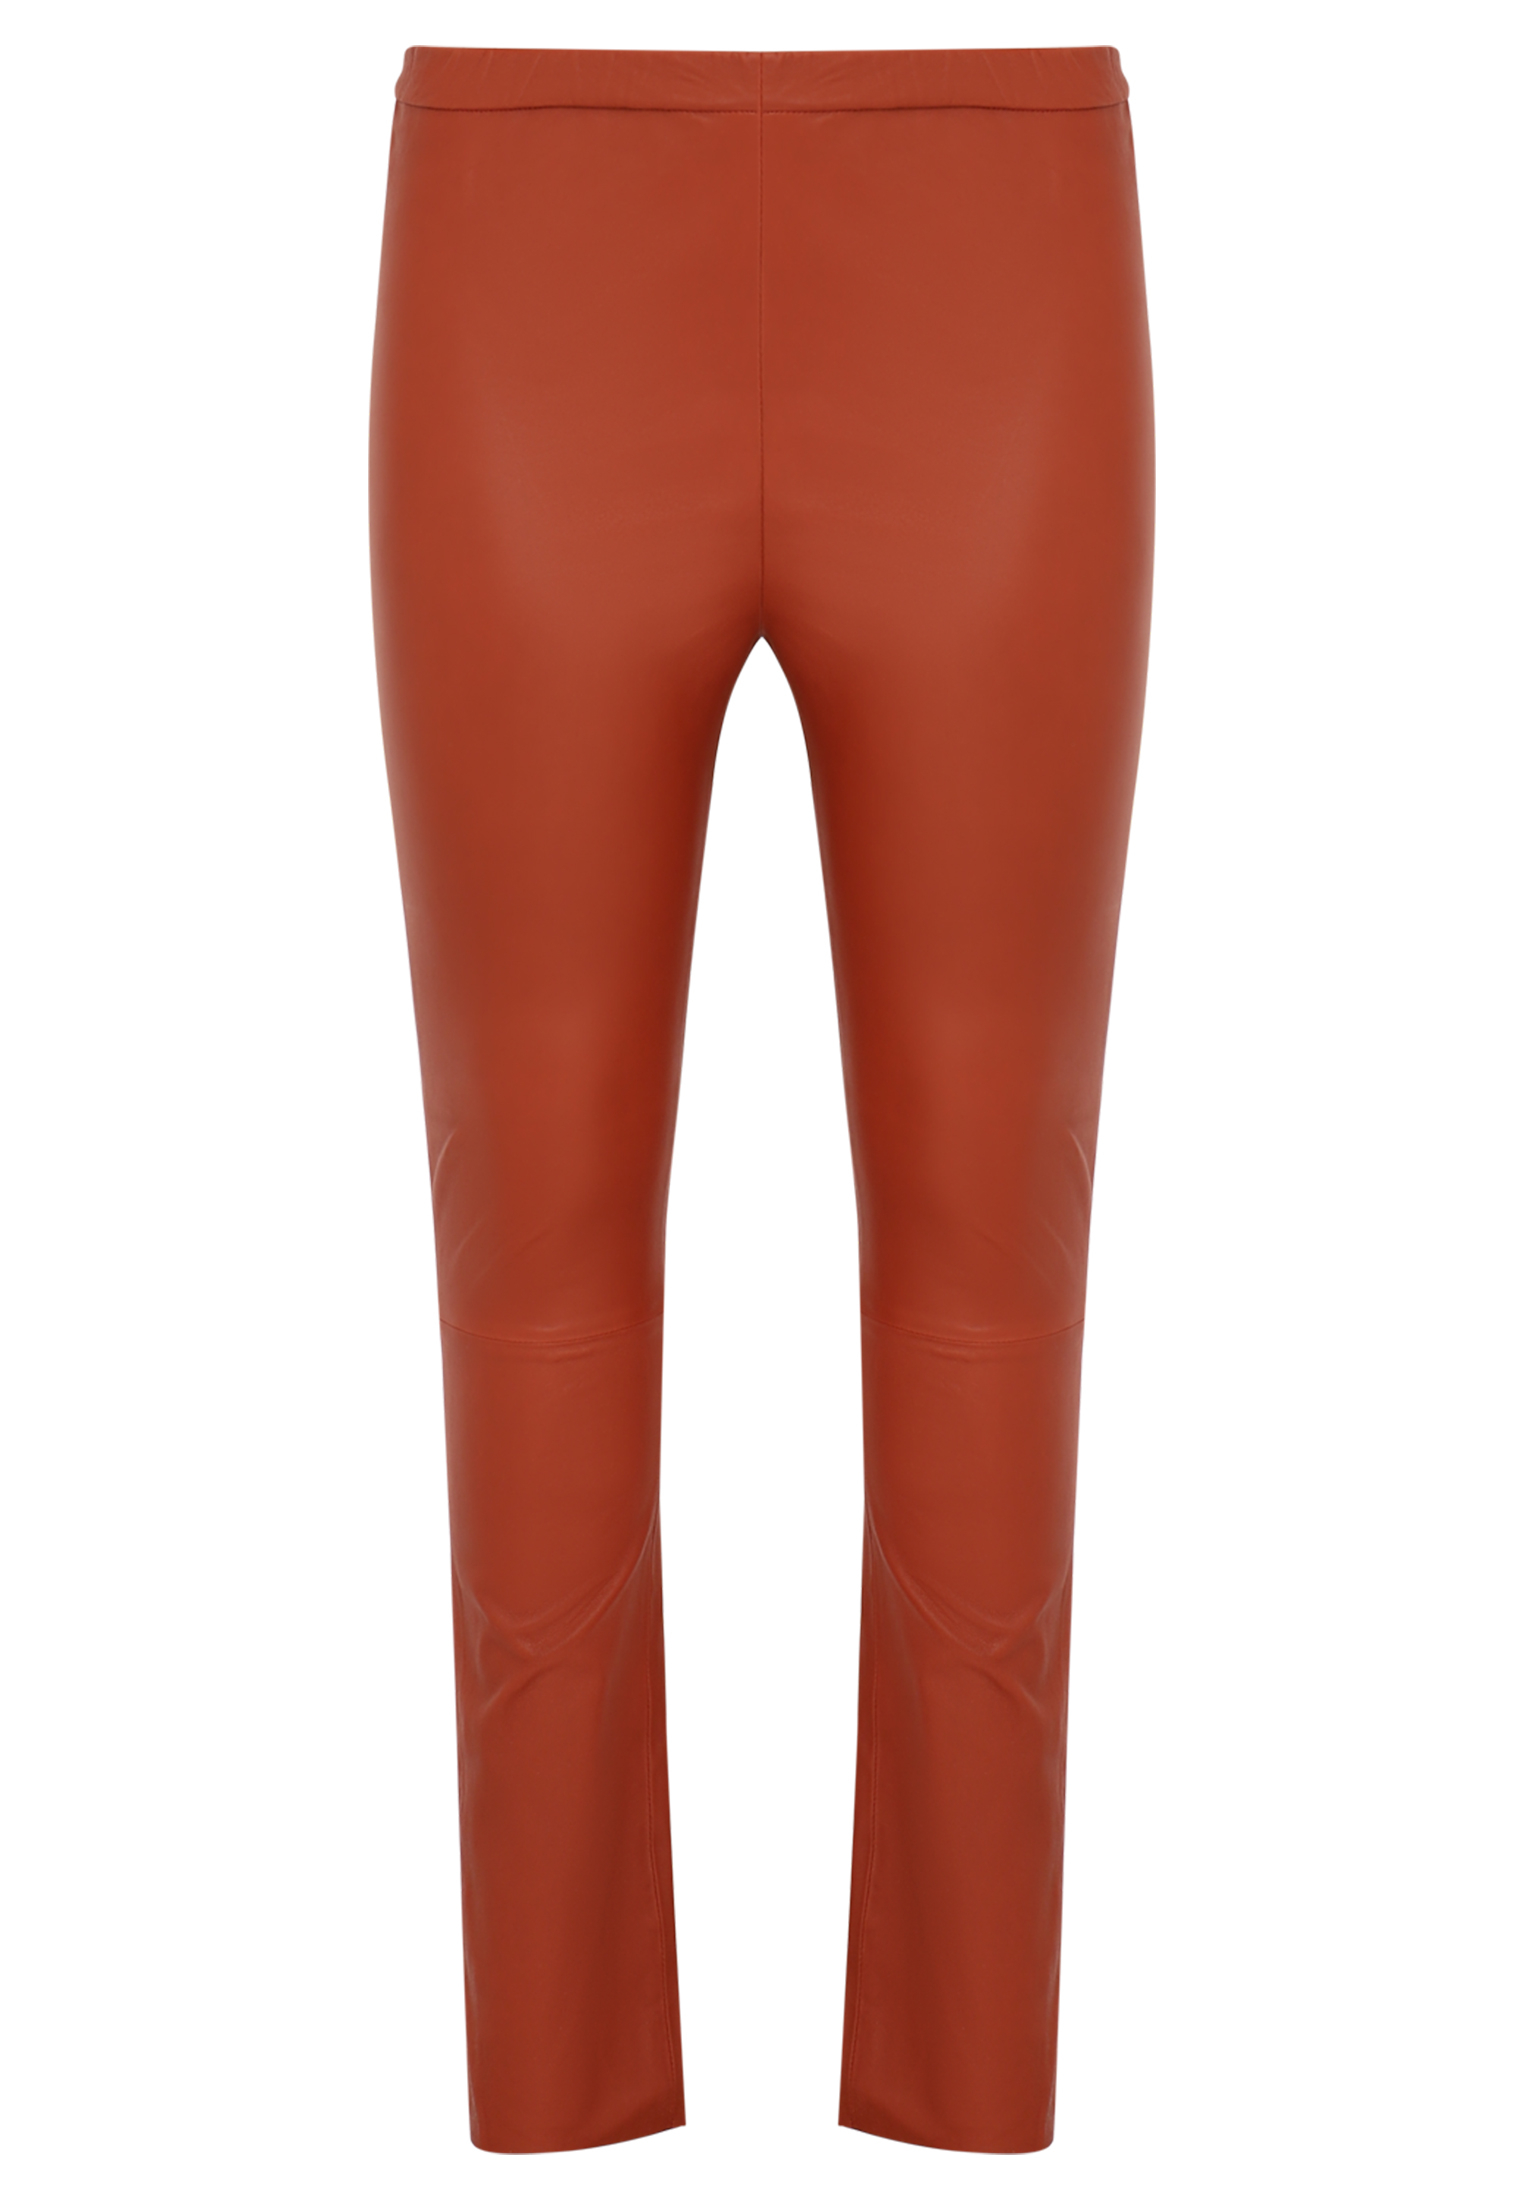 Legging full stretch leather - black green red mid brown